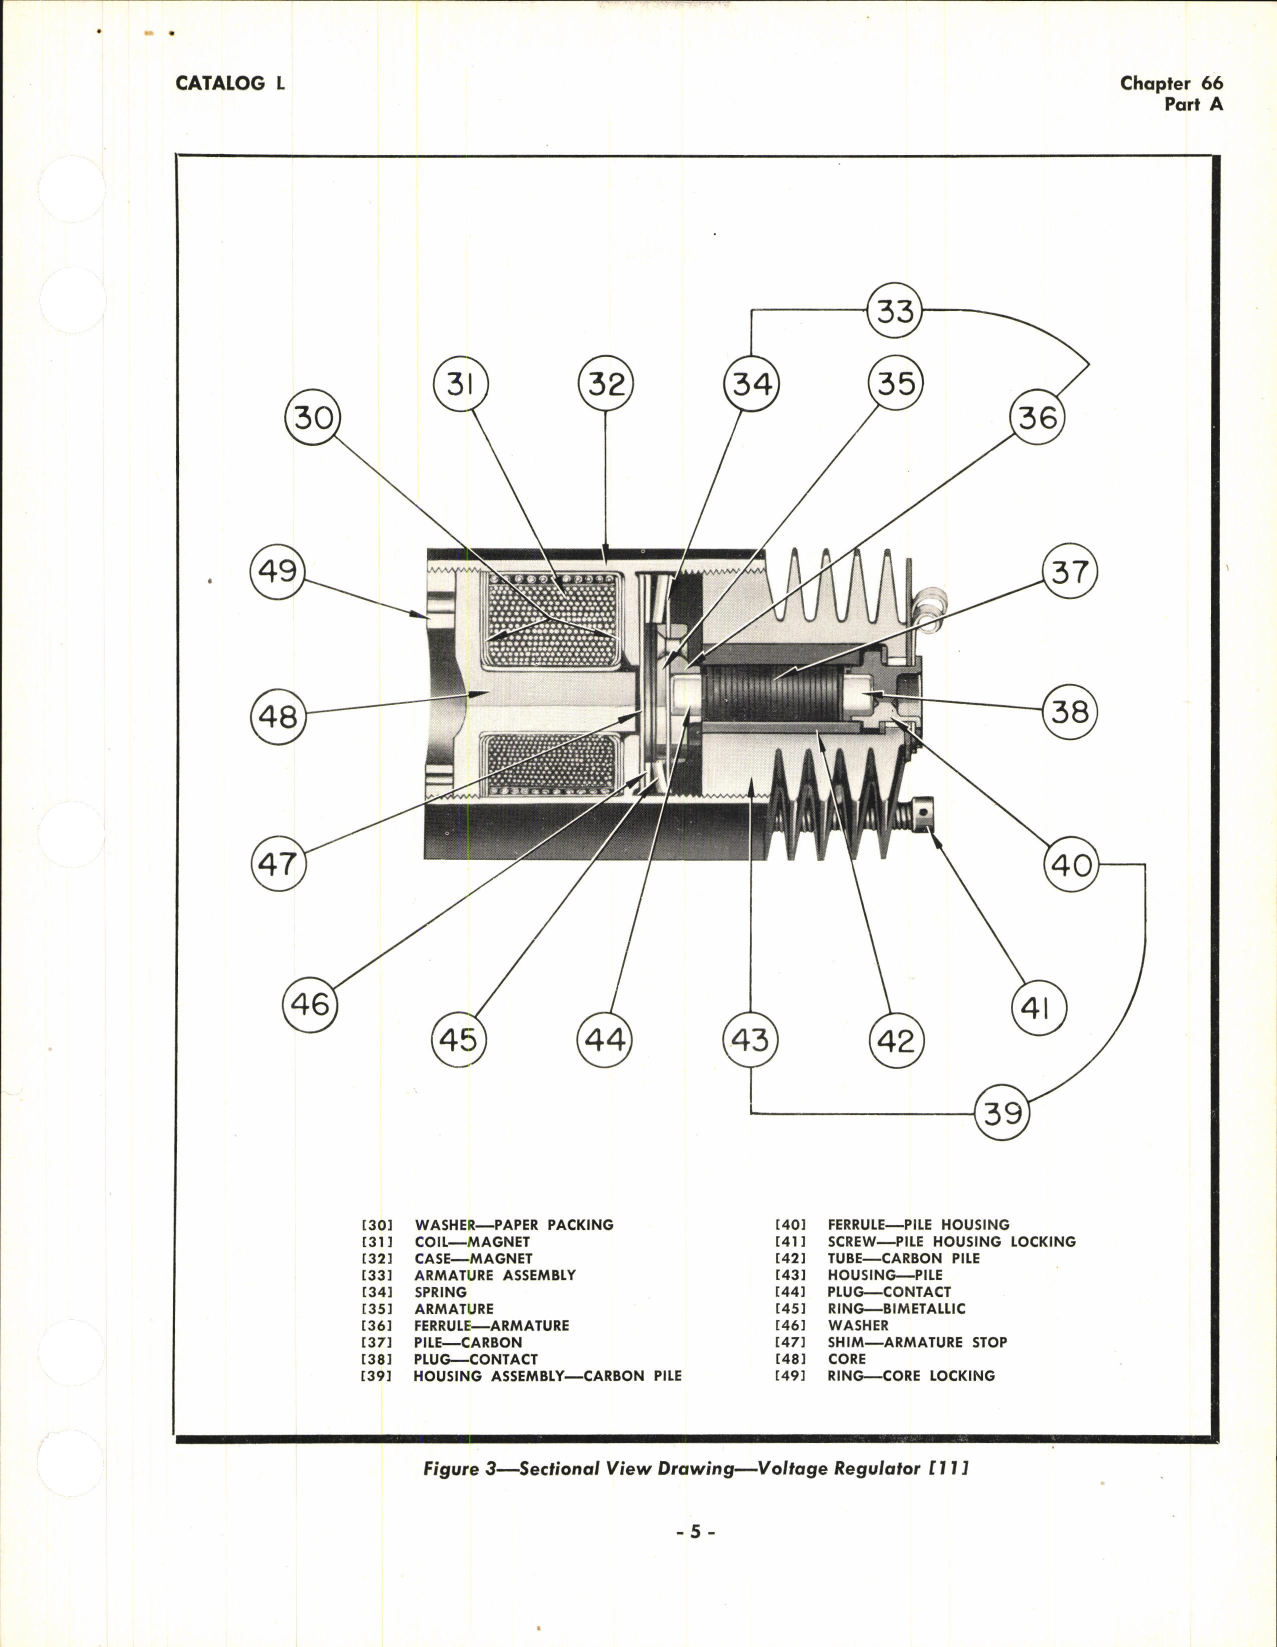 Sample page 5 from AirCorps Library document: Operating and Service Instructions for D-C Carbon Pile Voltage Regulator Control Panel Type 1202 Model 1